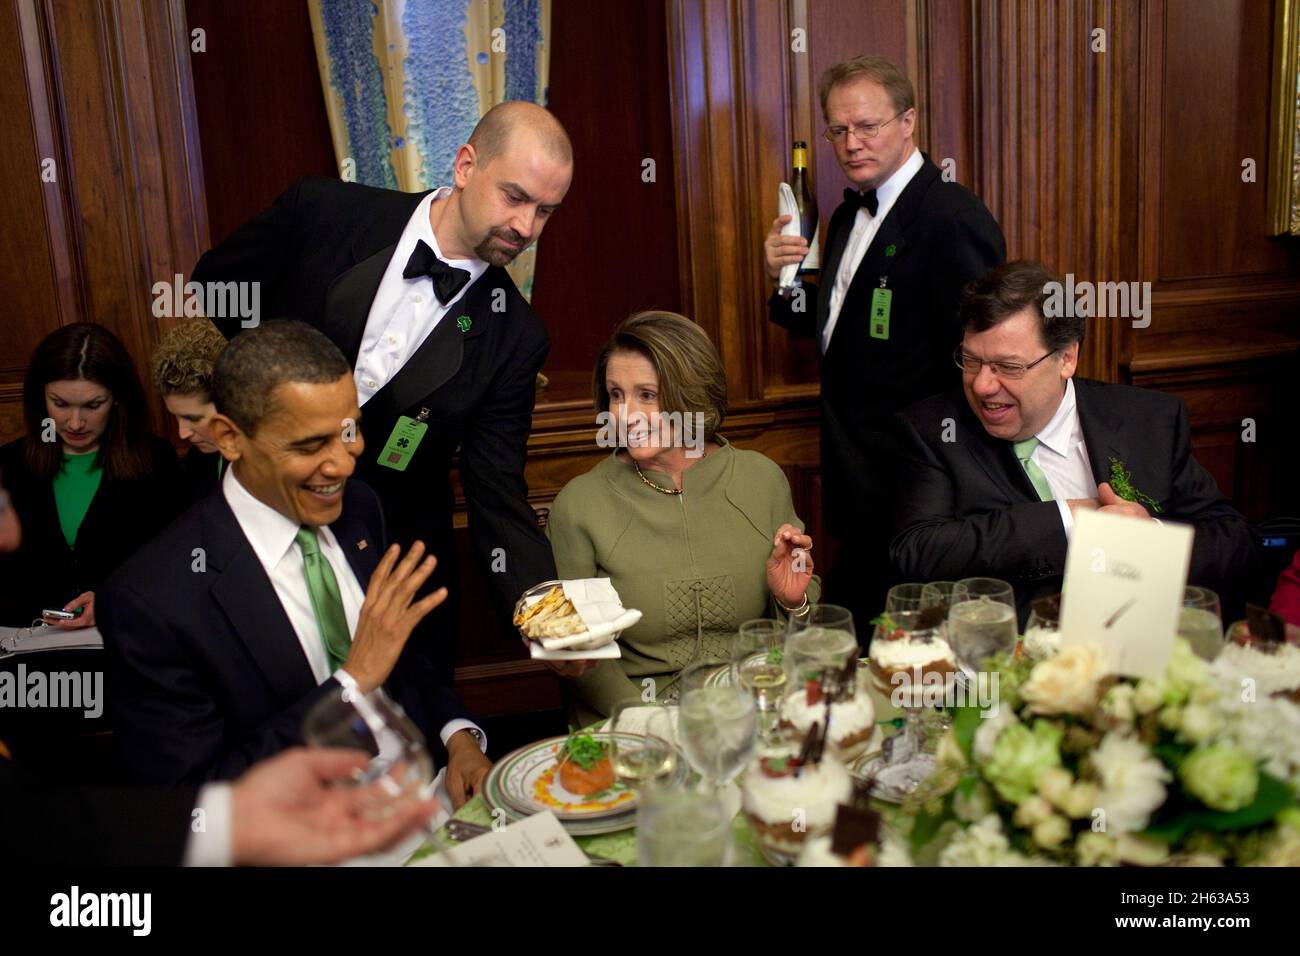 President Barack Obama and Prime Minister  Brian Cowen of Ireland attend a St. Patrick's Day lunch hosted by House Speaker Nancy Pelosi in the Rayburn Building, U.S. Capitol, Washington D.C. 3/17/09 Stock Photo